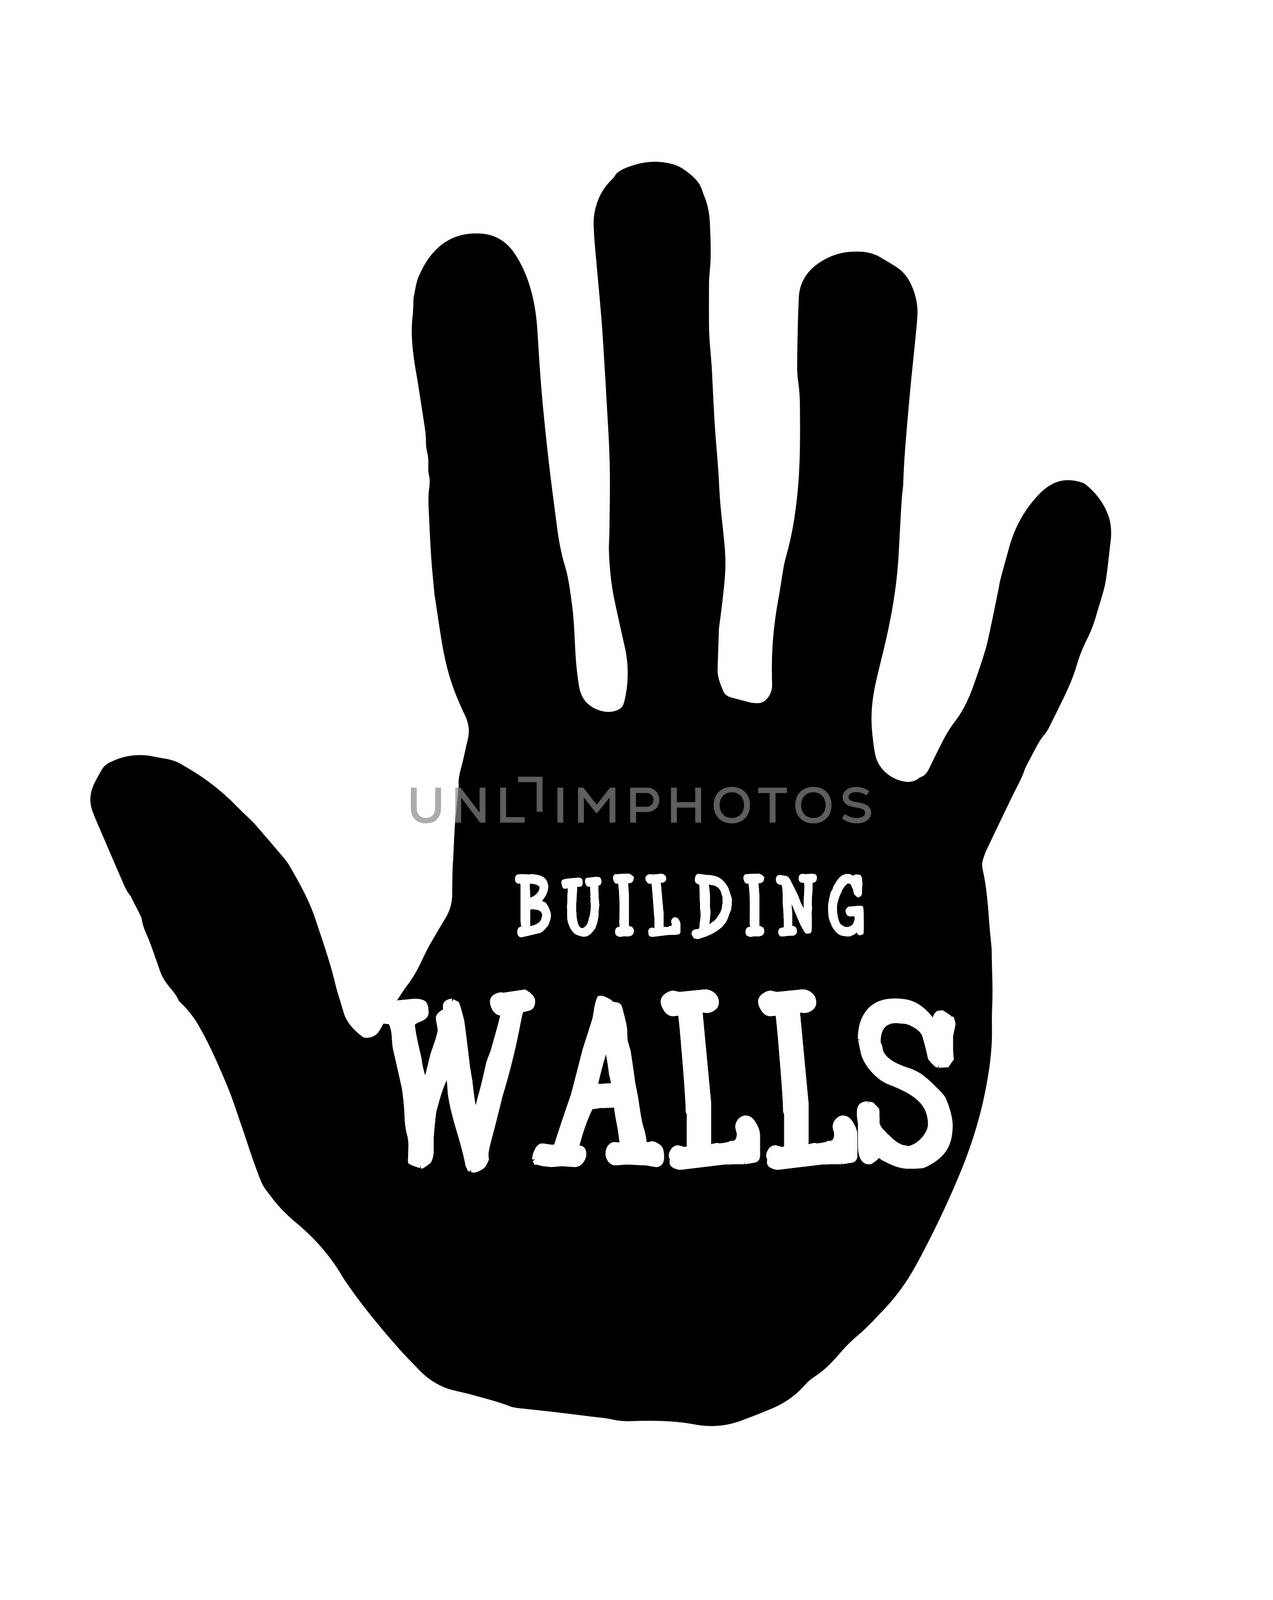 Man handprint isolated on white background showing stop building walls